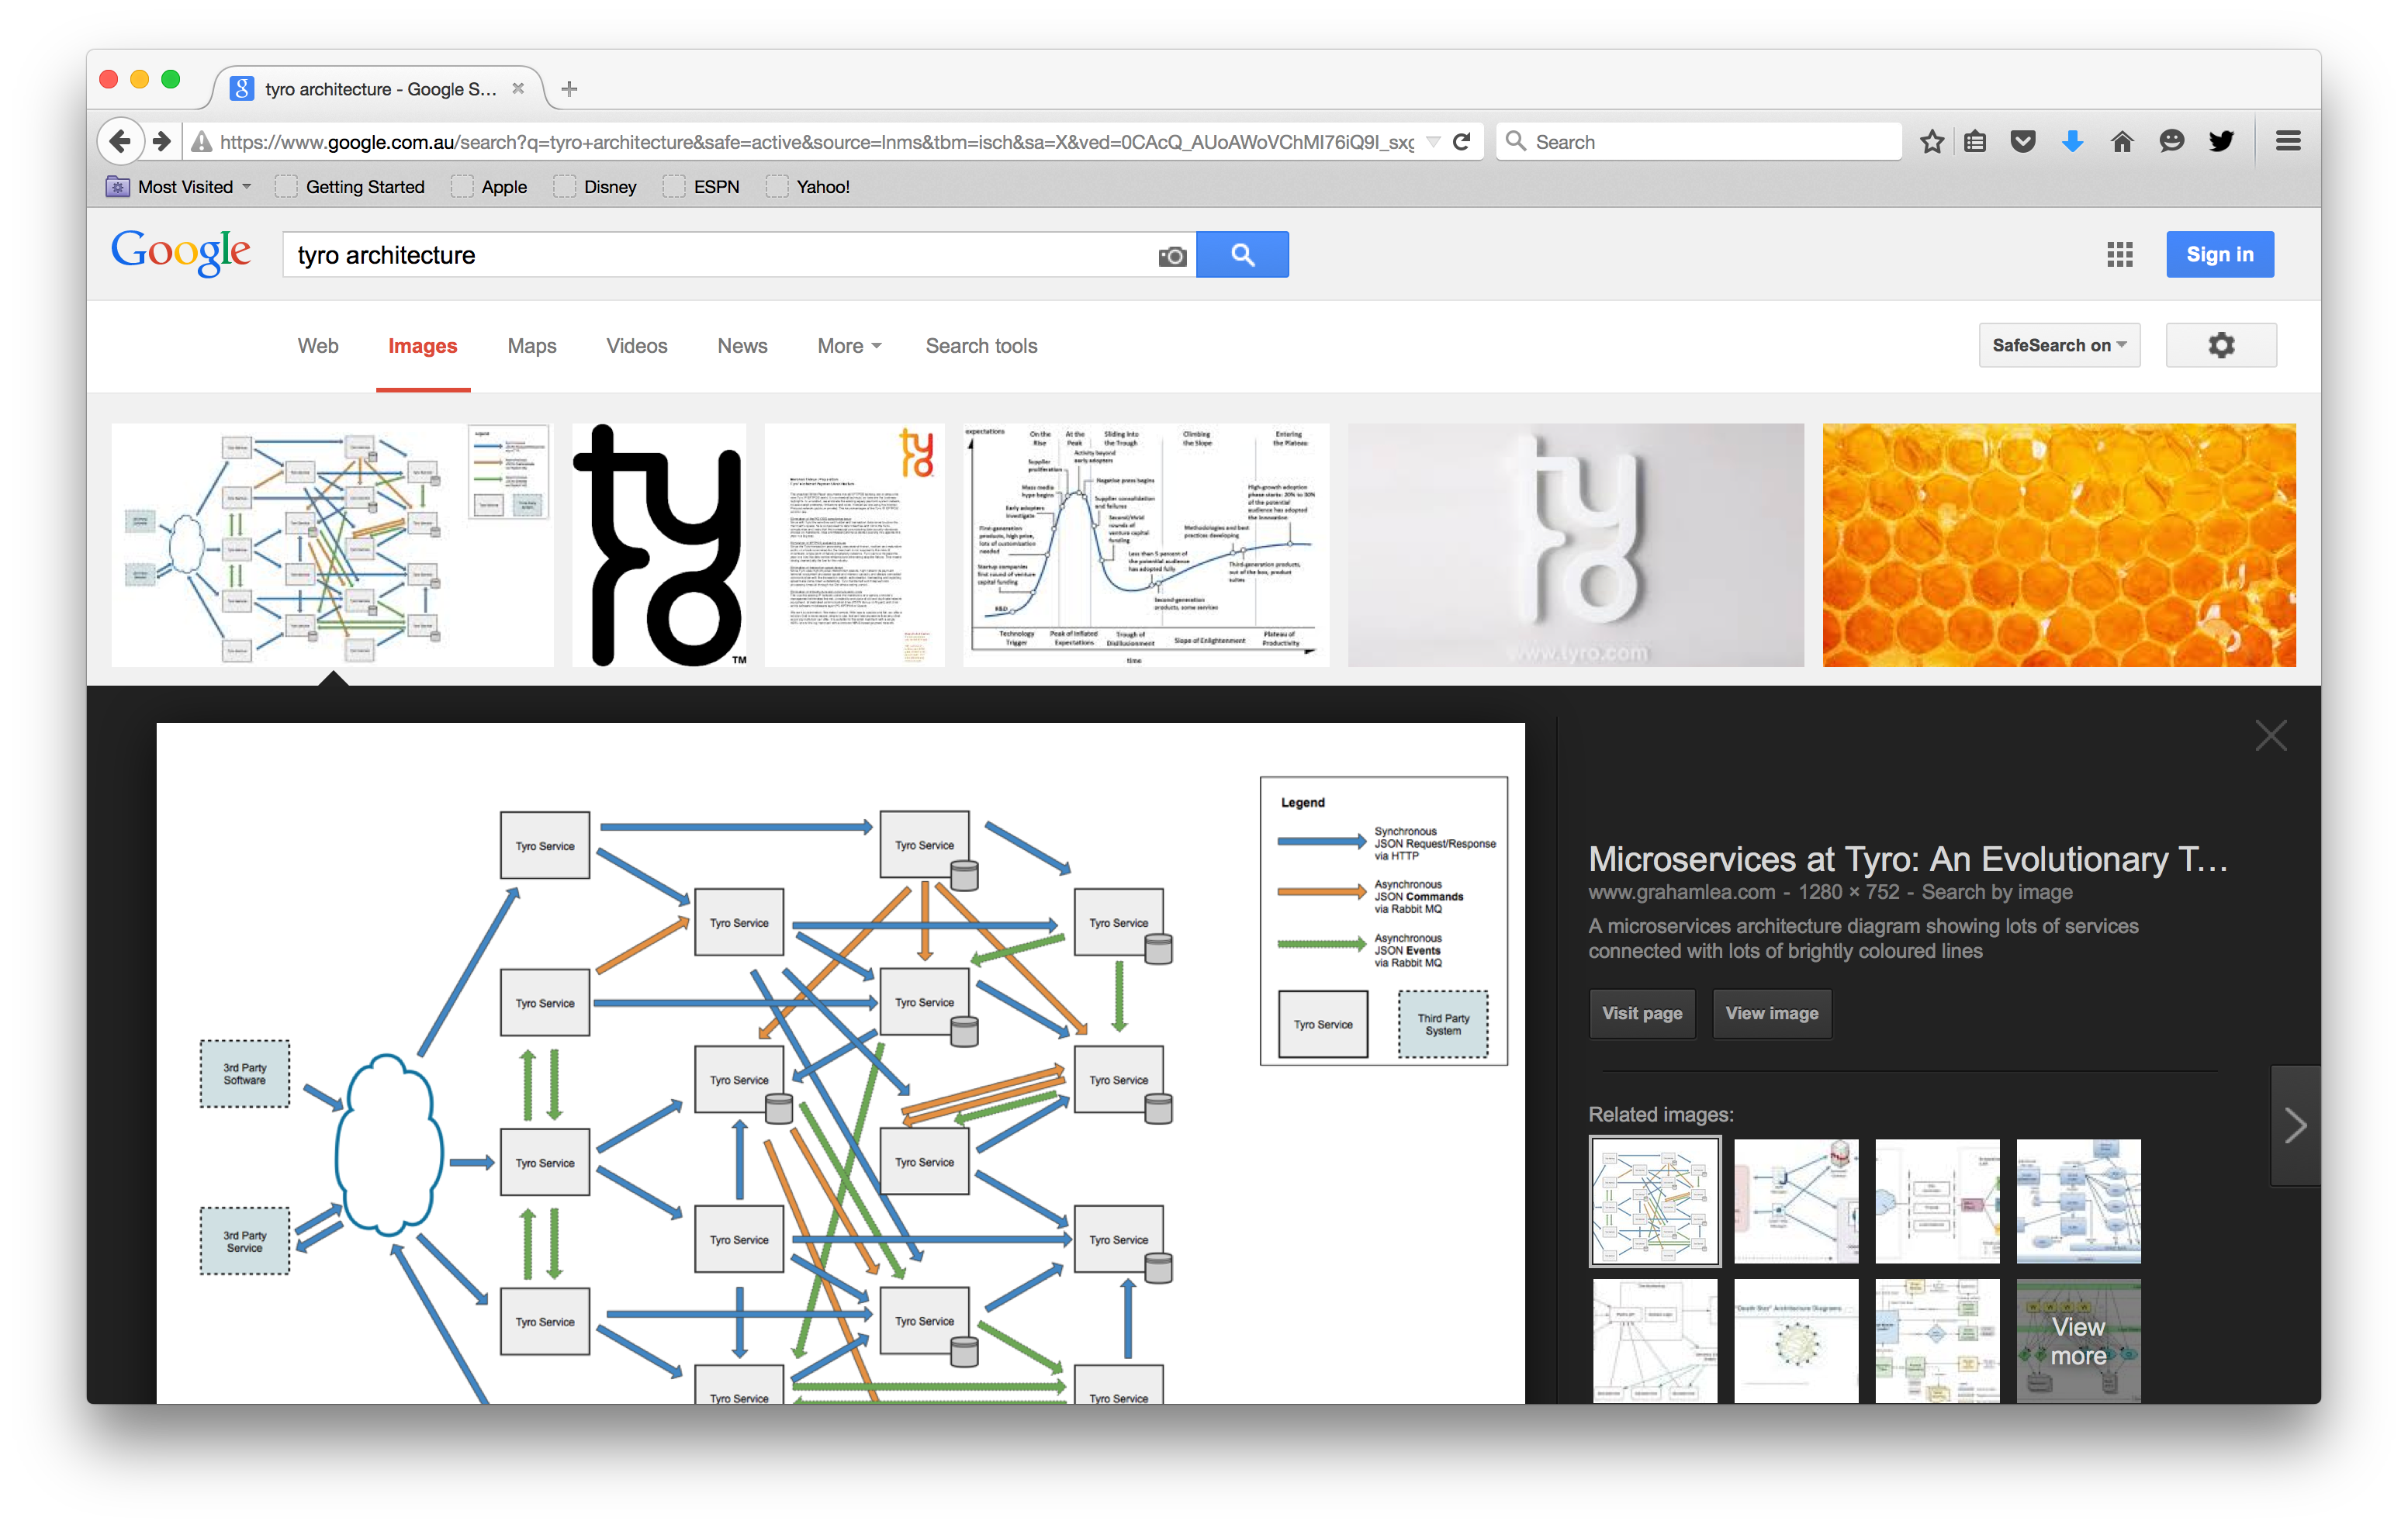 Screenshot of searching in Google for 'Tyro Architecture' and finding my fake diagram. Are your microservices security controls made public for all to see?